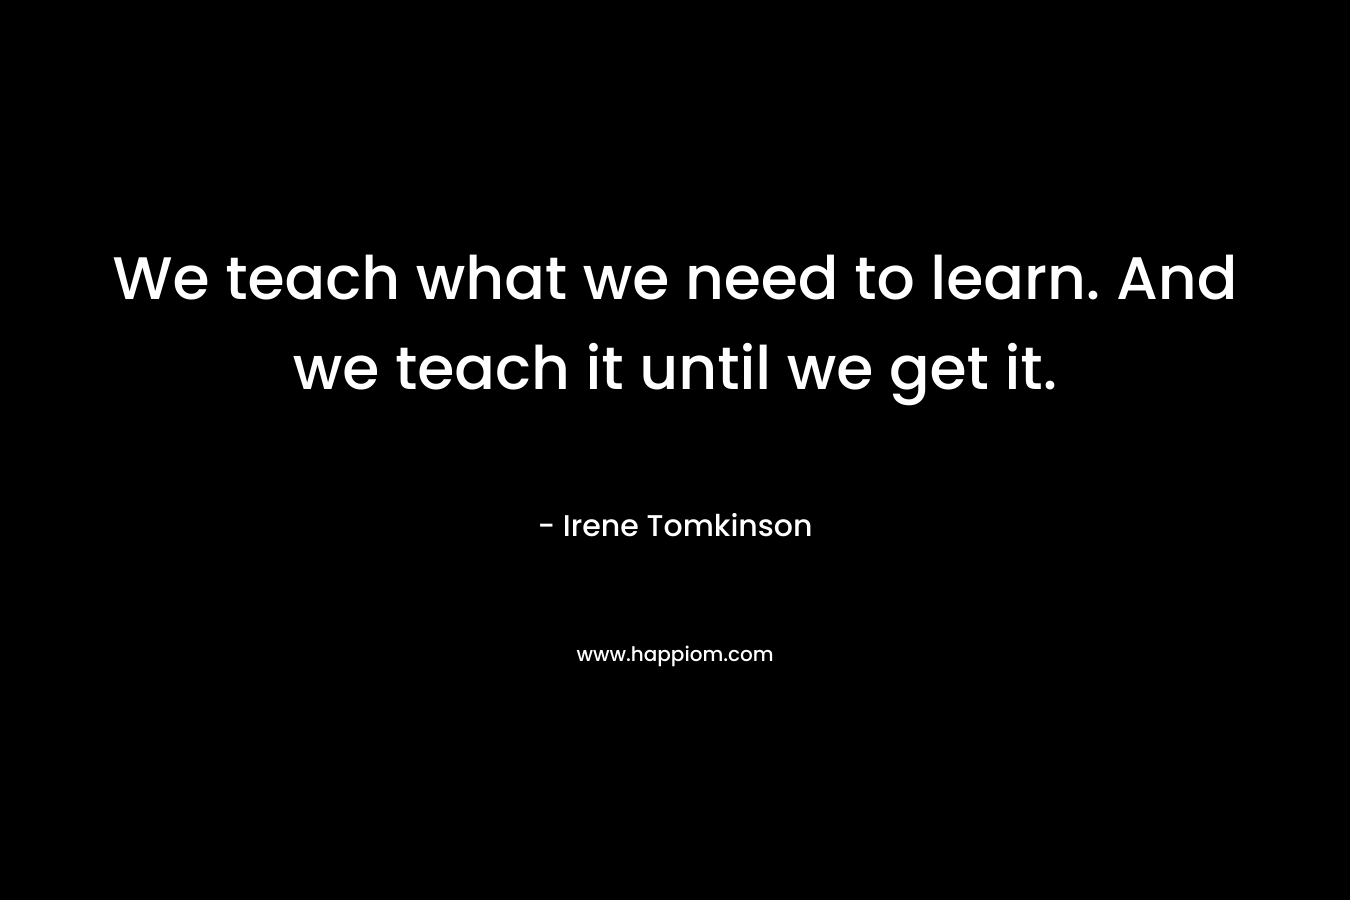 We teach what we need to learn. And we teach it until we get it.